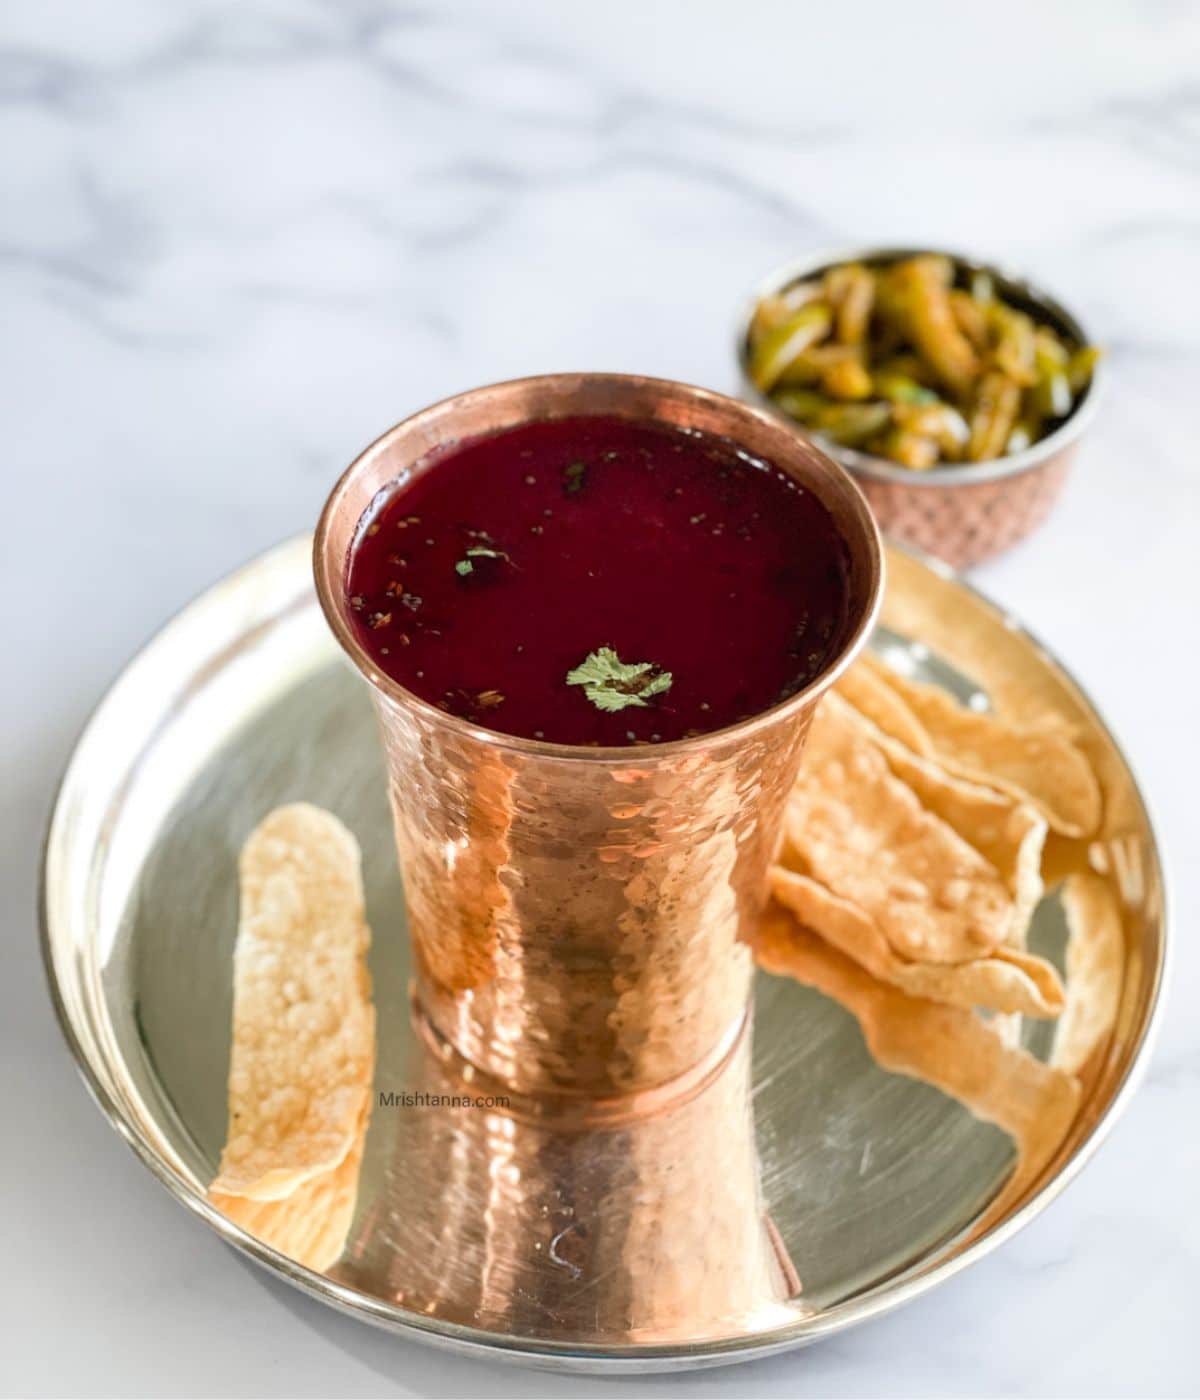 A copper mug is filled with beetroot rasam on the plate along with papad.